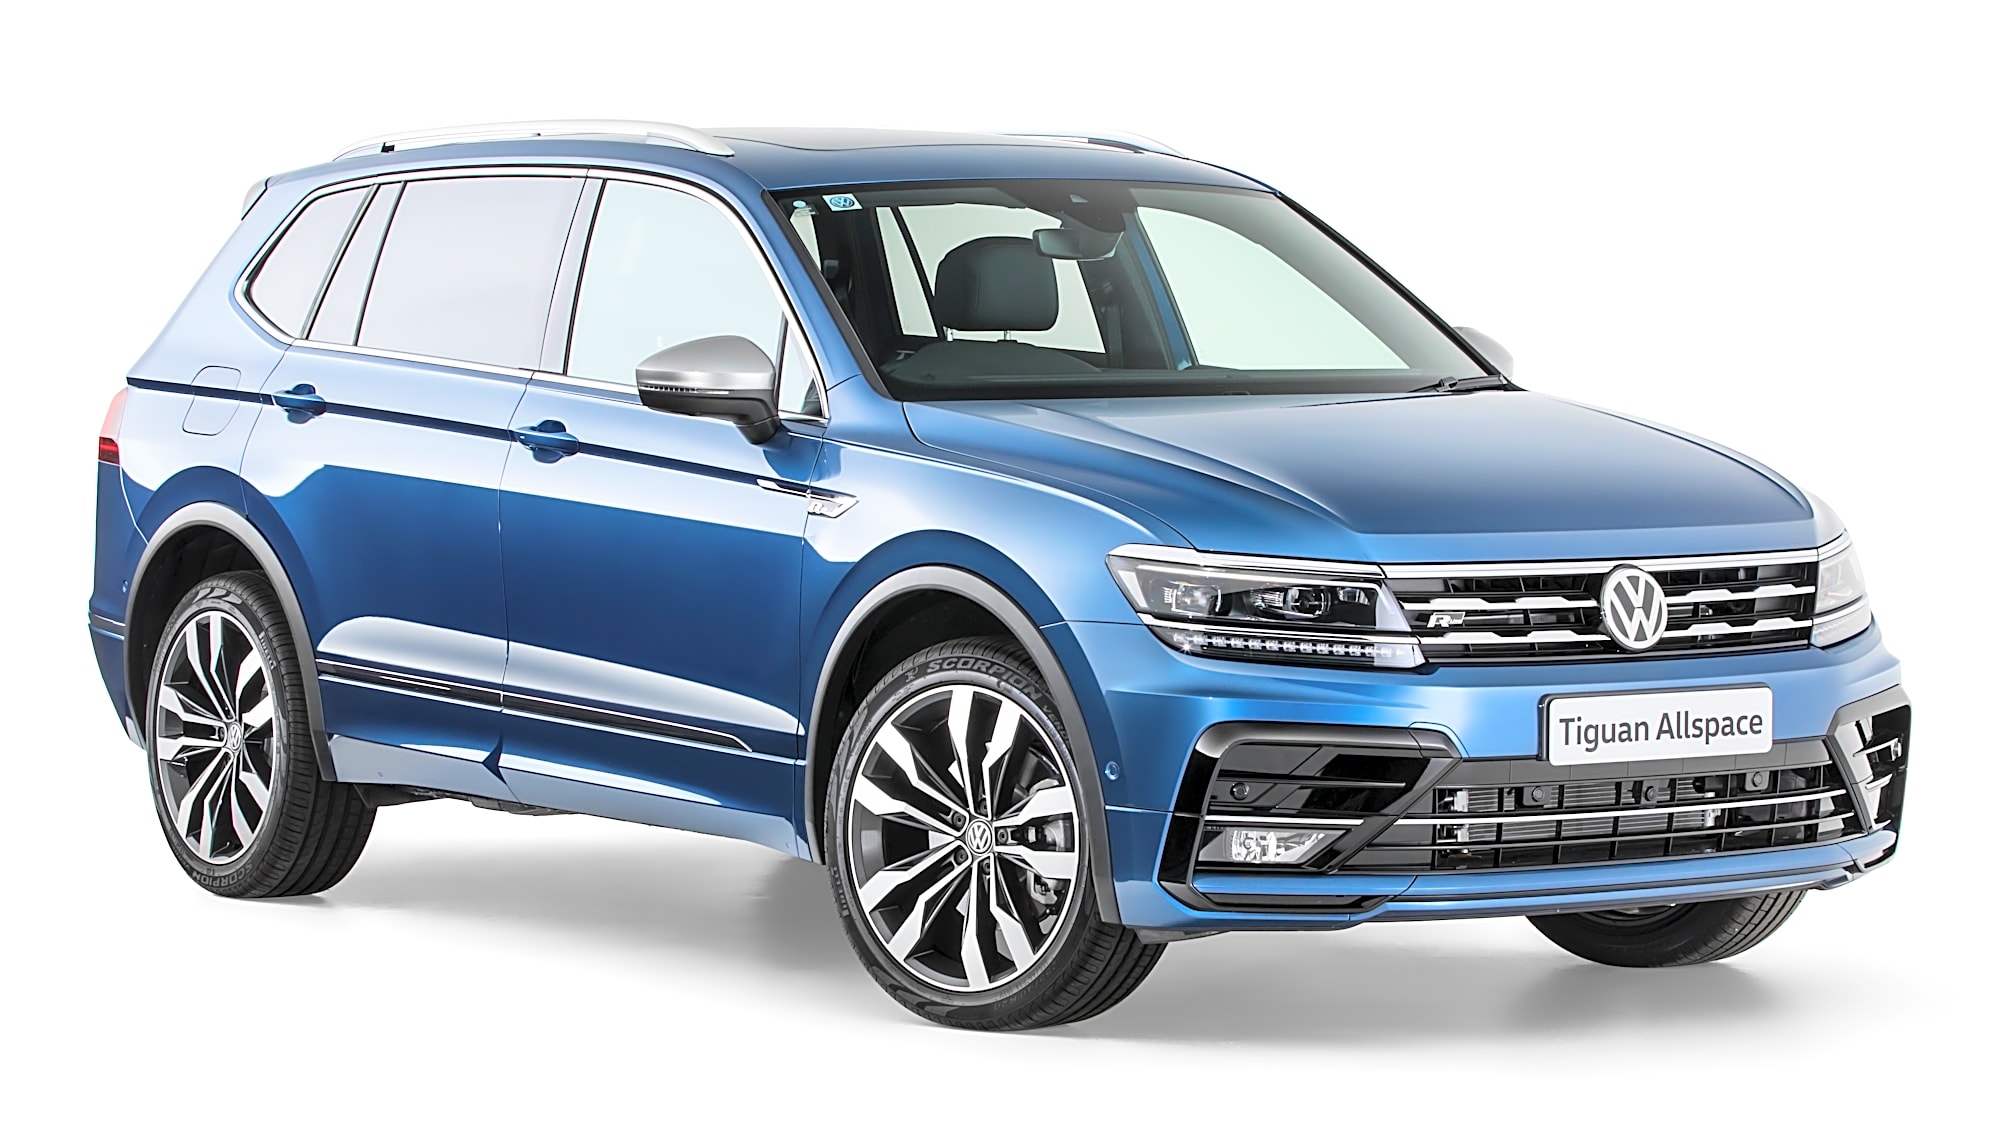 2018 Volkswagen Tiguan Allspace pricing and specs | CarAdvice